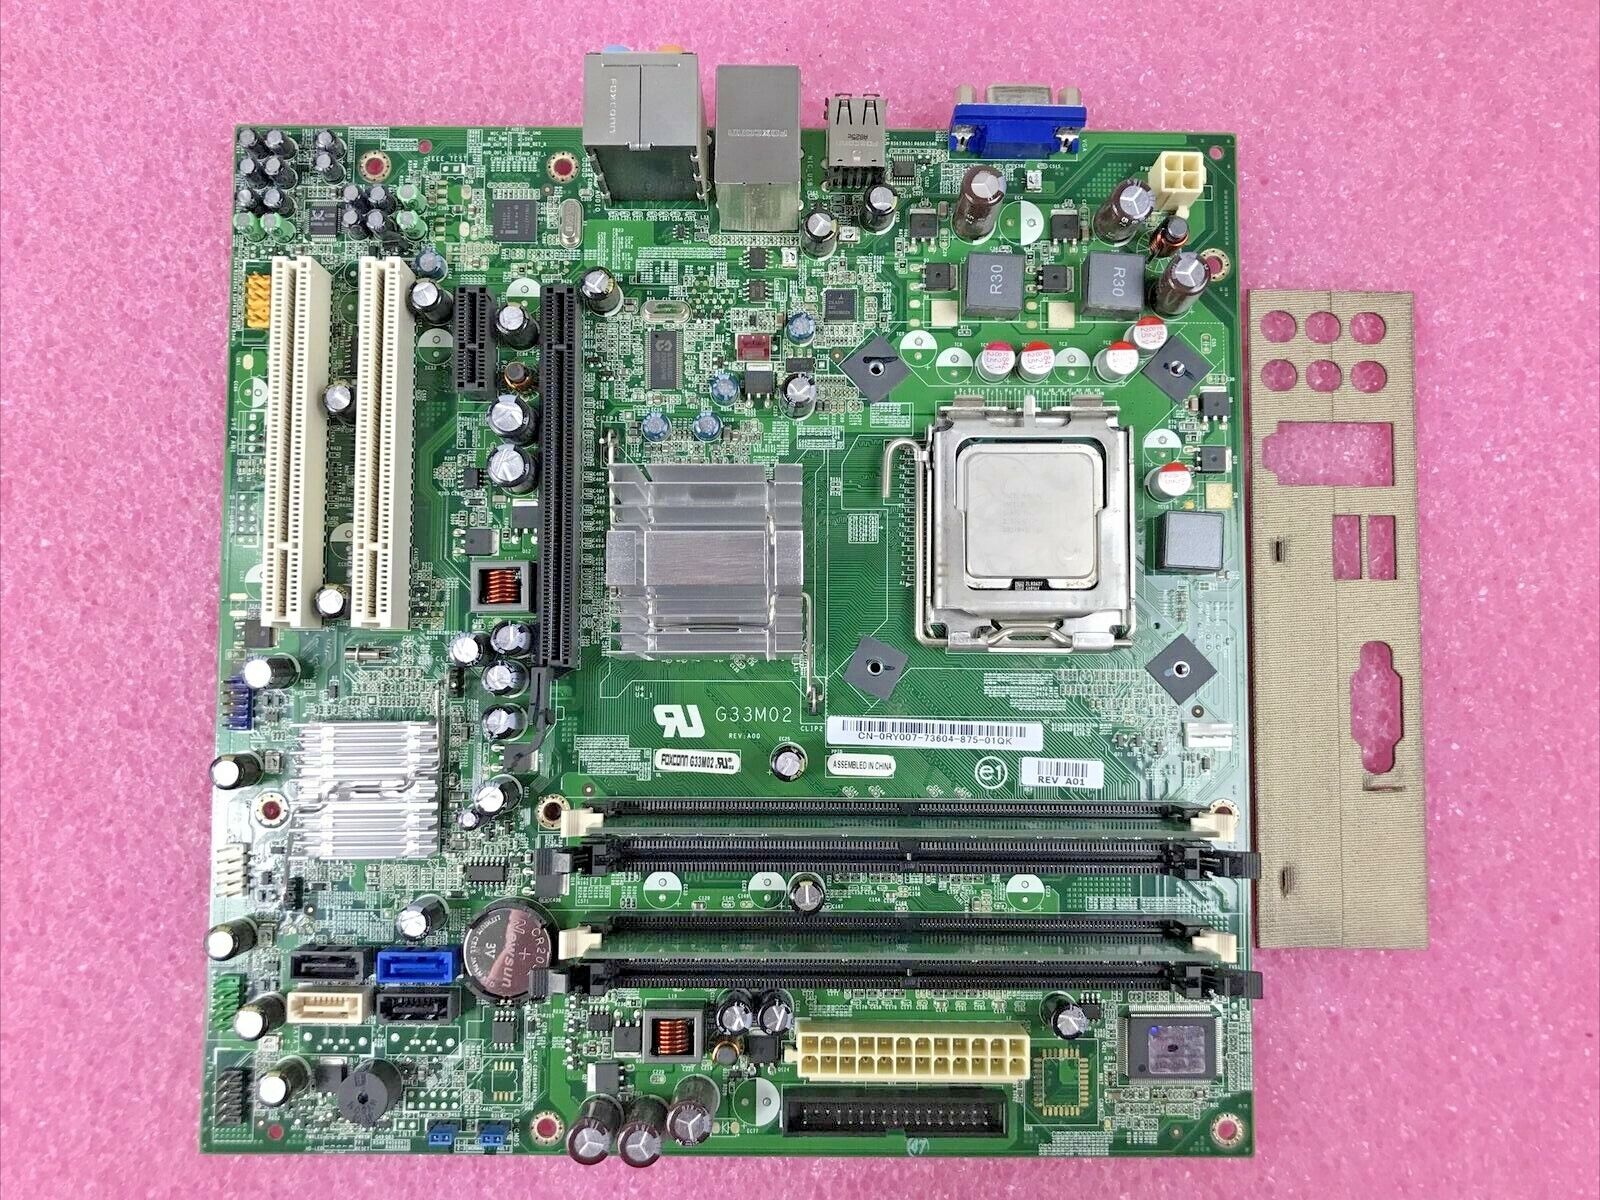 Dell 0RY007 Motherboard Intel Core 2 Duo E7200 2.53GHz 2GB RAM with I/O Shield